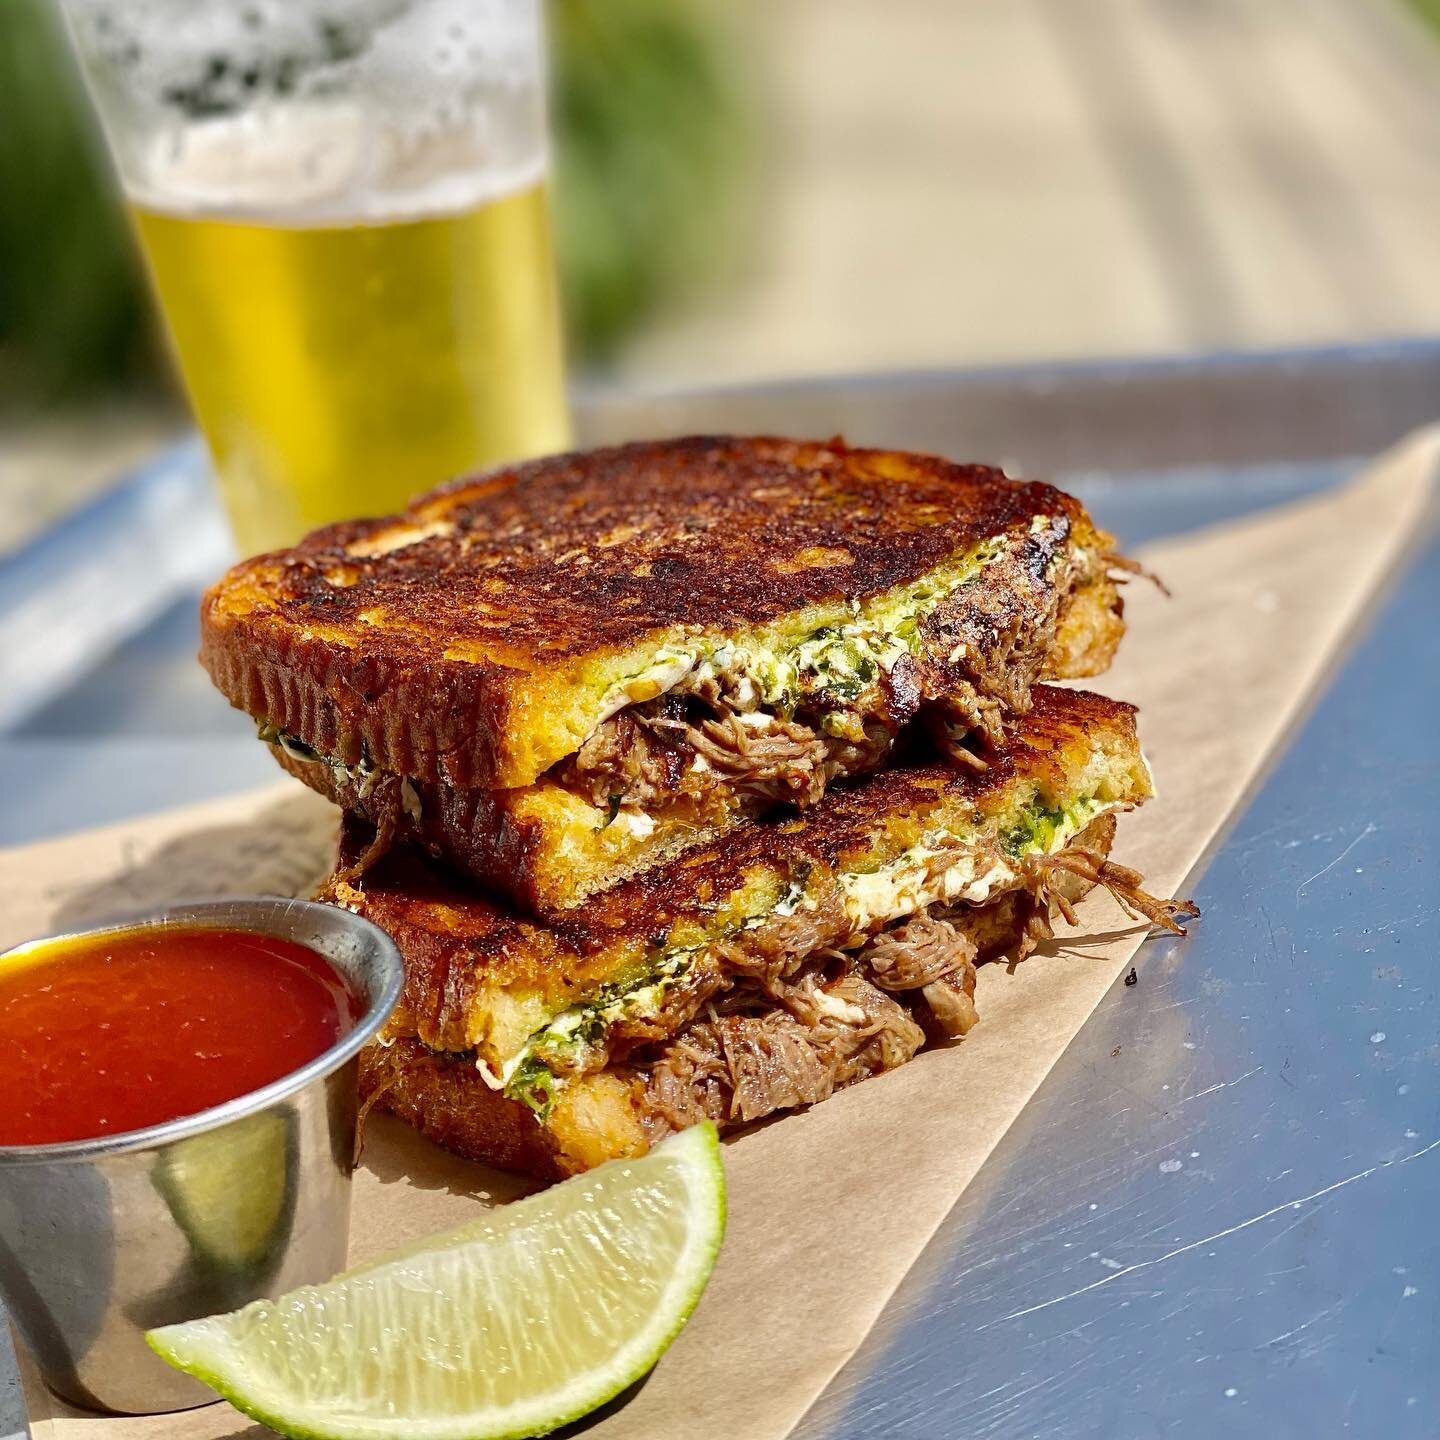 HAPPY CINCO DE MAYO! 🪅

🧀 BIRRIA GRILLED CHEESE UNTIL THEY SELL OUT!

🍺 $3 MODELOS ALL DAY!